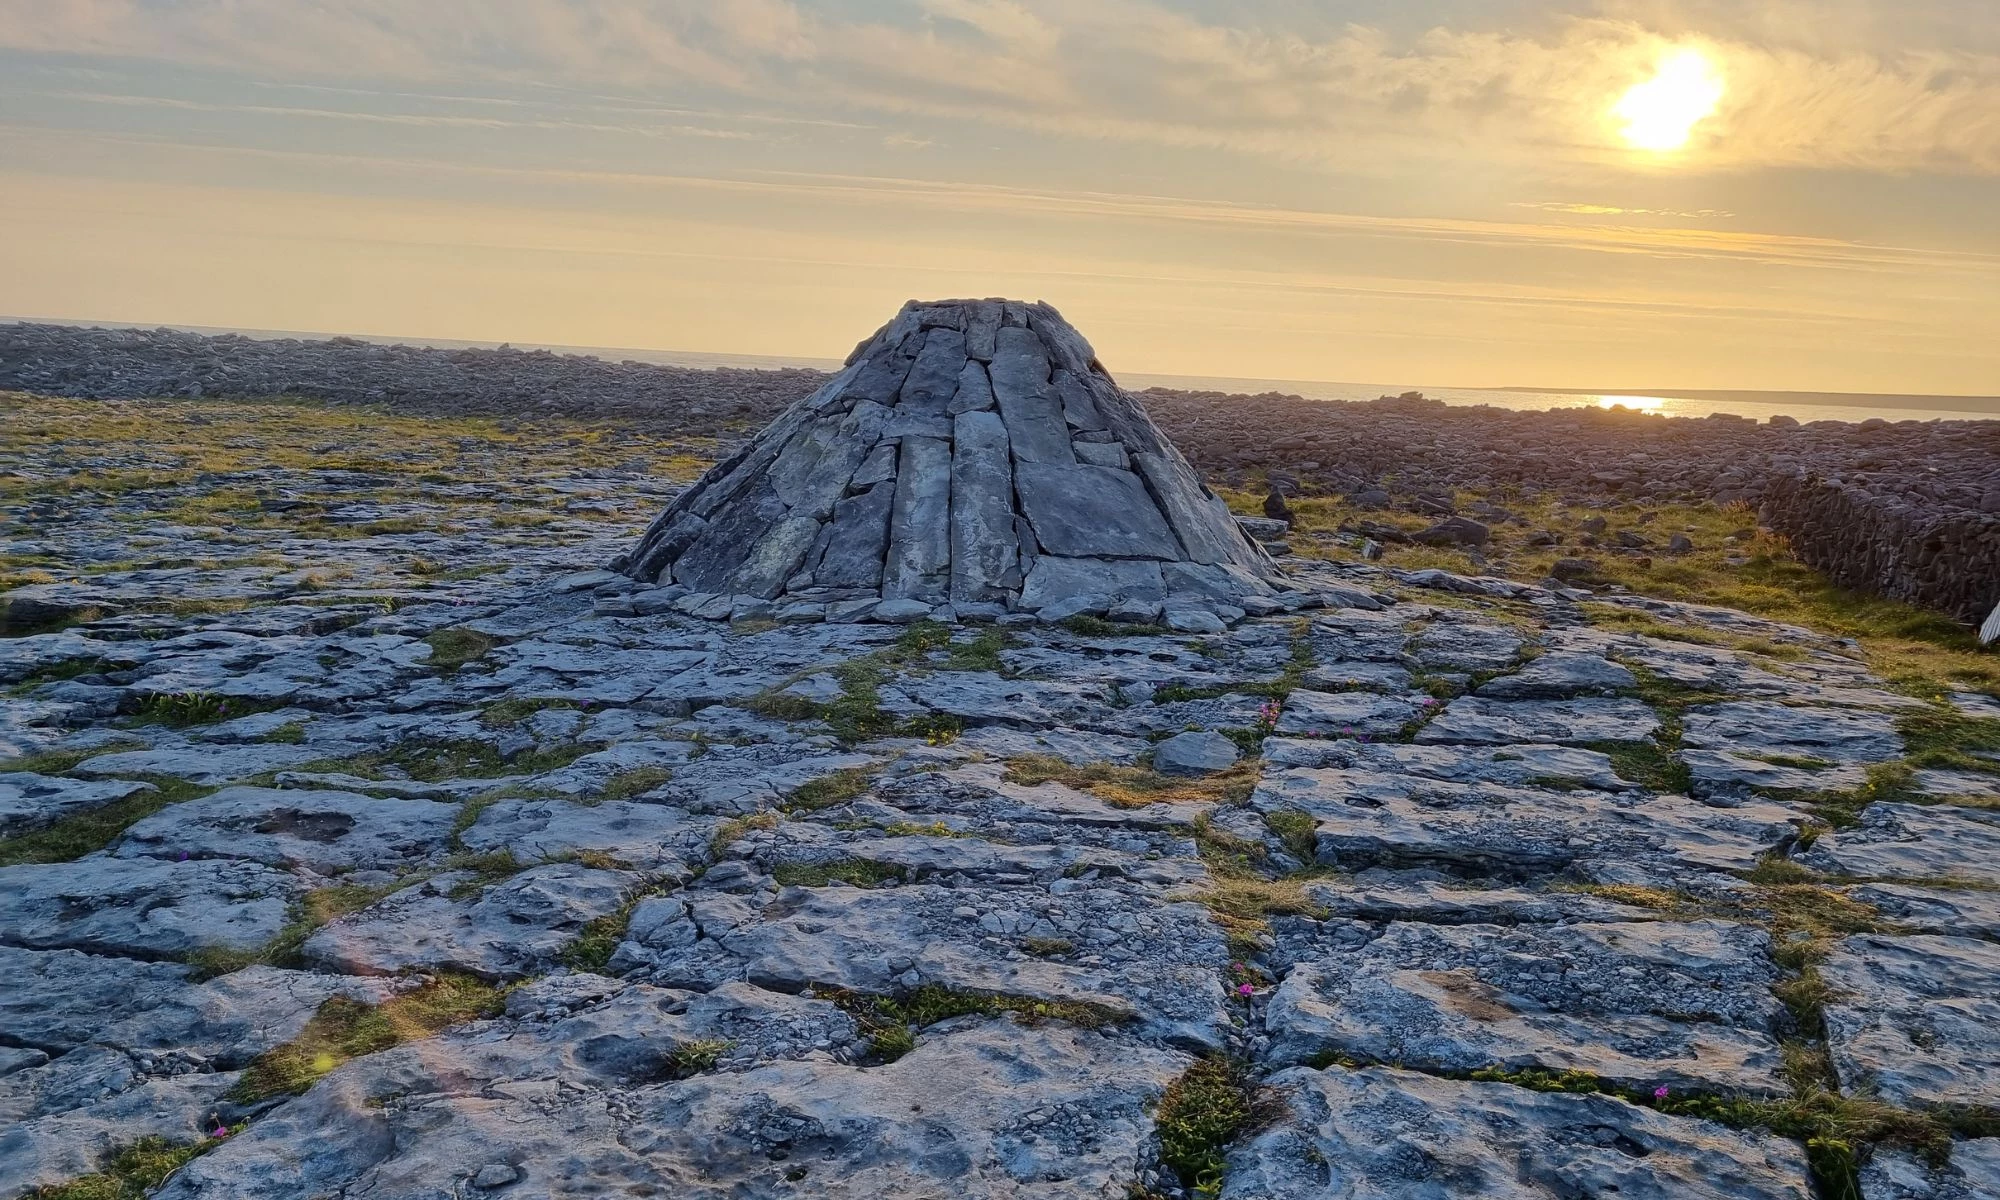 View of conical rocky structure in rockey landscape at sunset. 